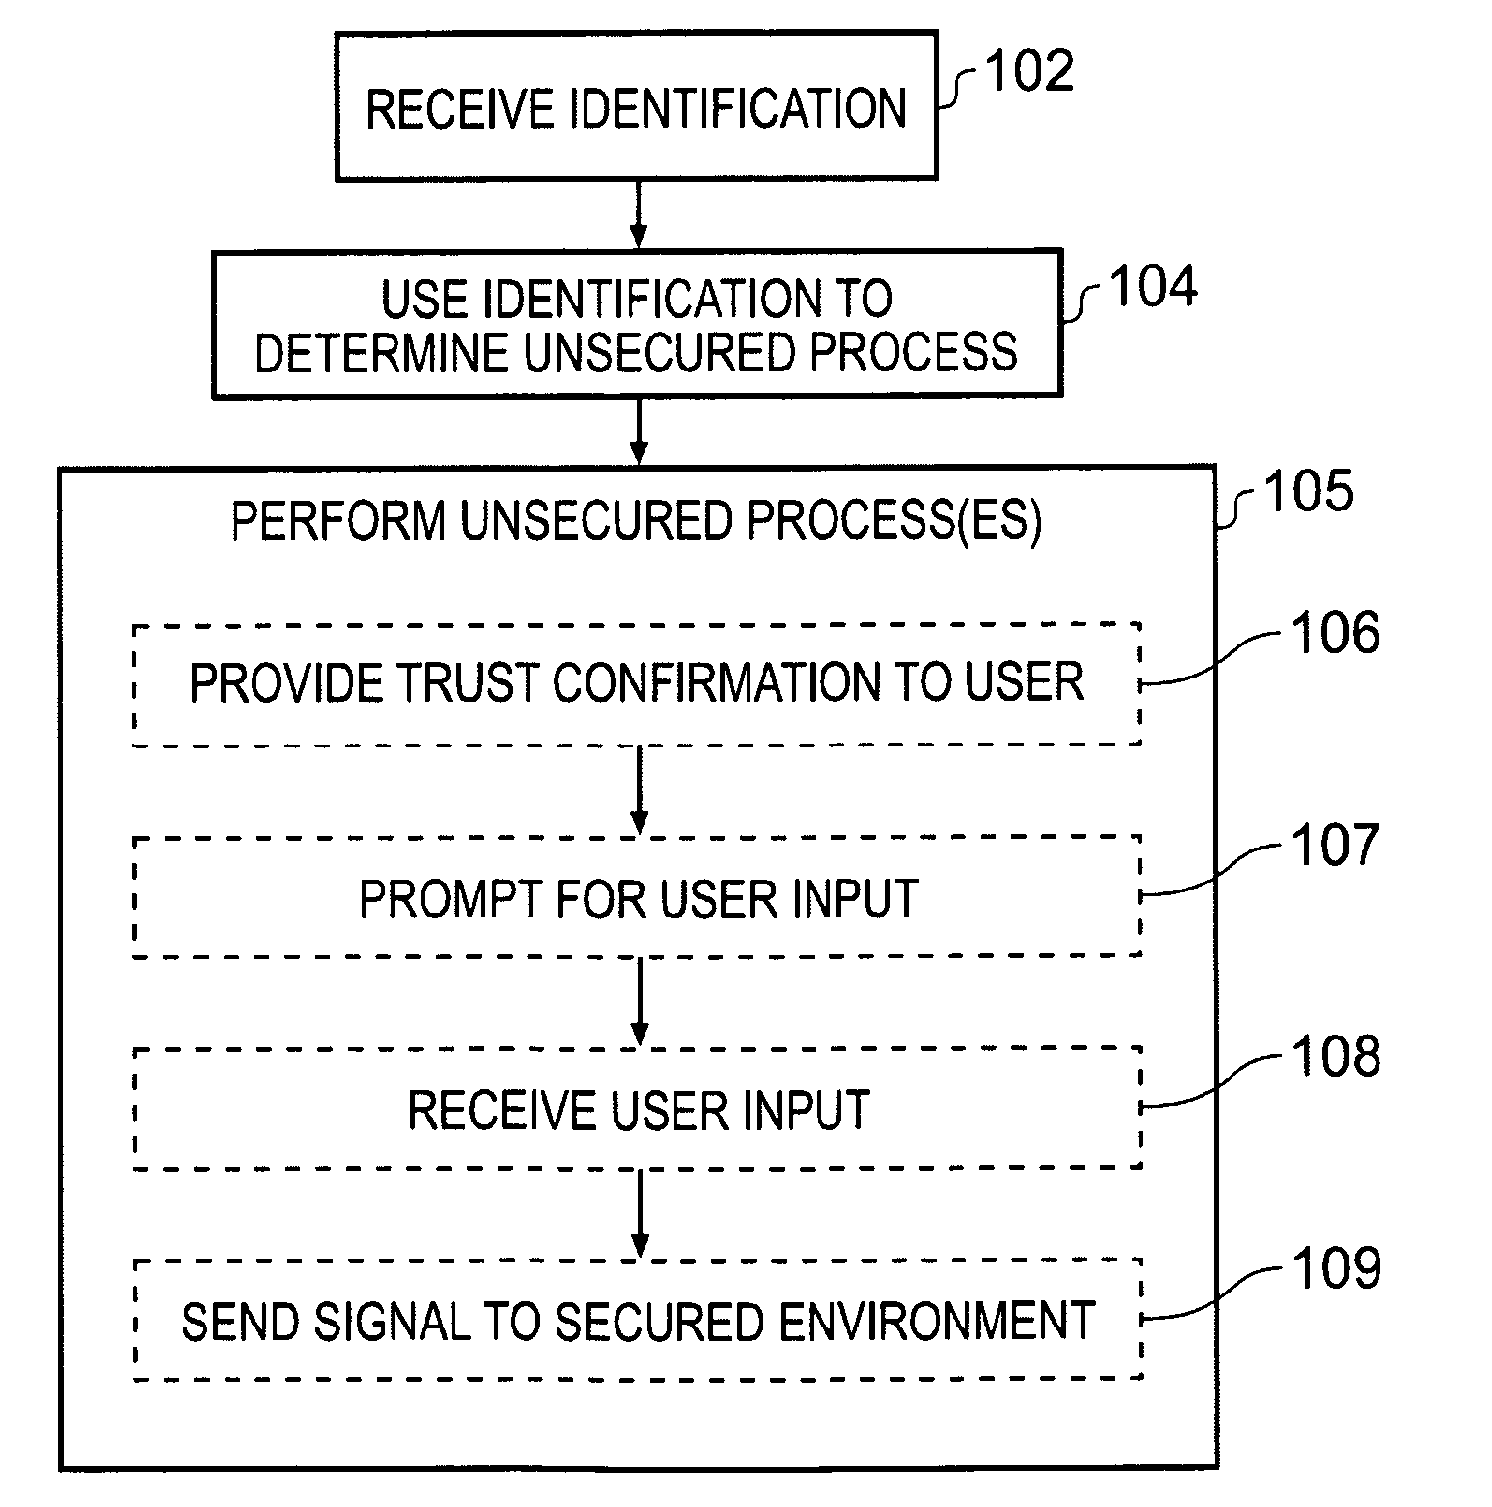 Interaction between secured and unsecured environments